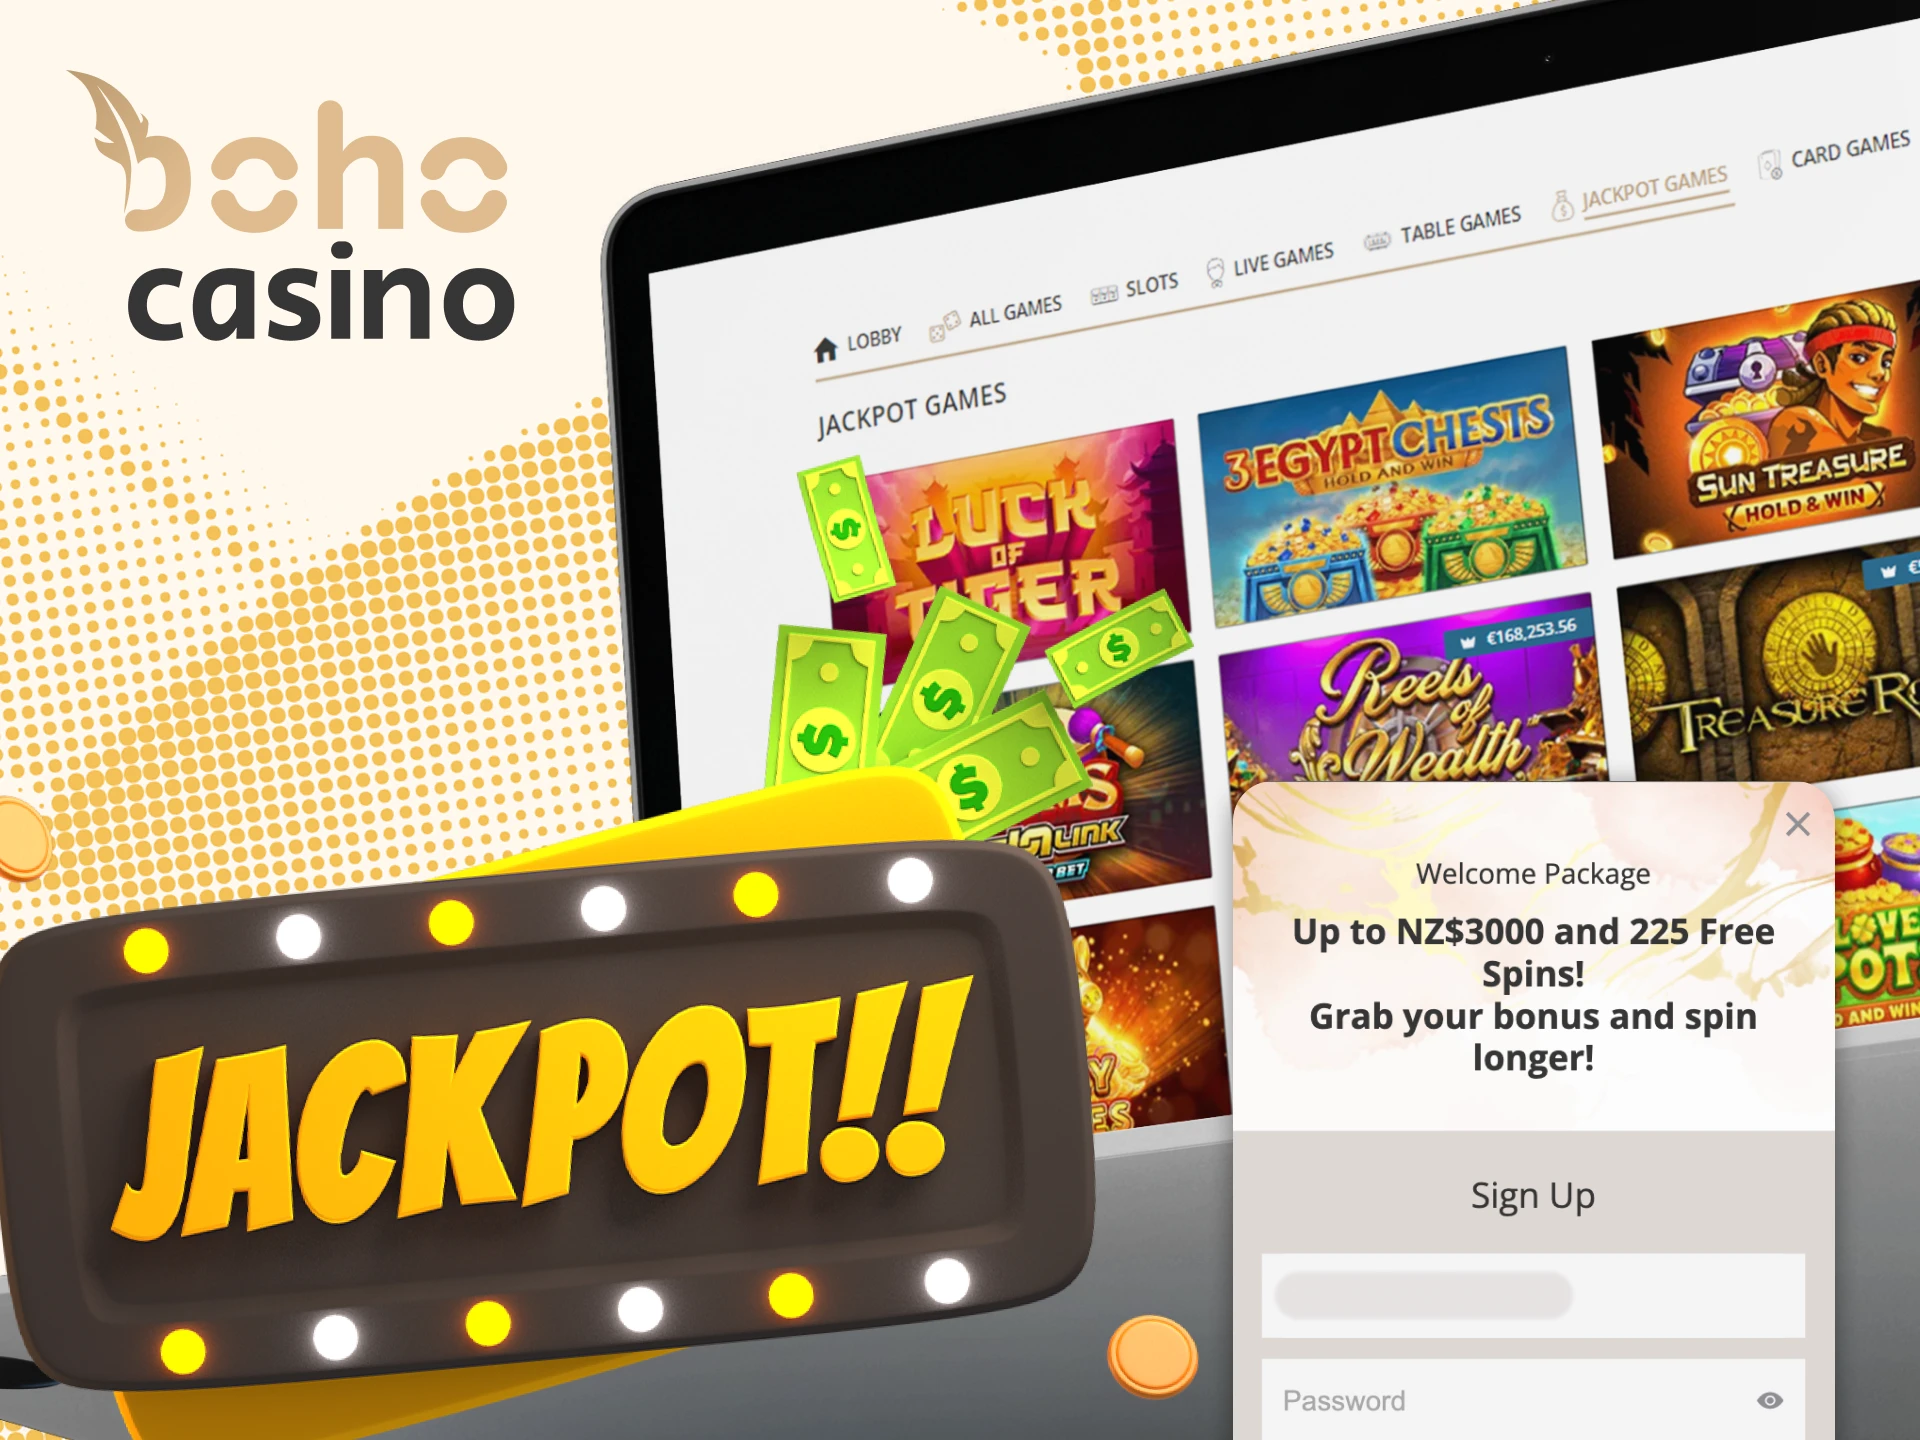 Only registered users can get full access to all Boho Casino jackpots.